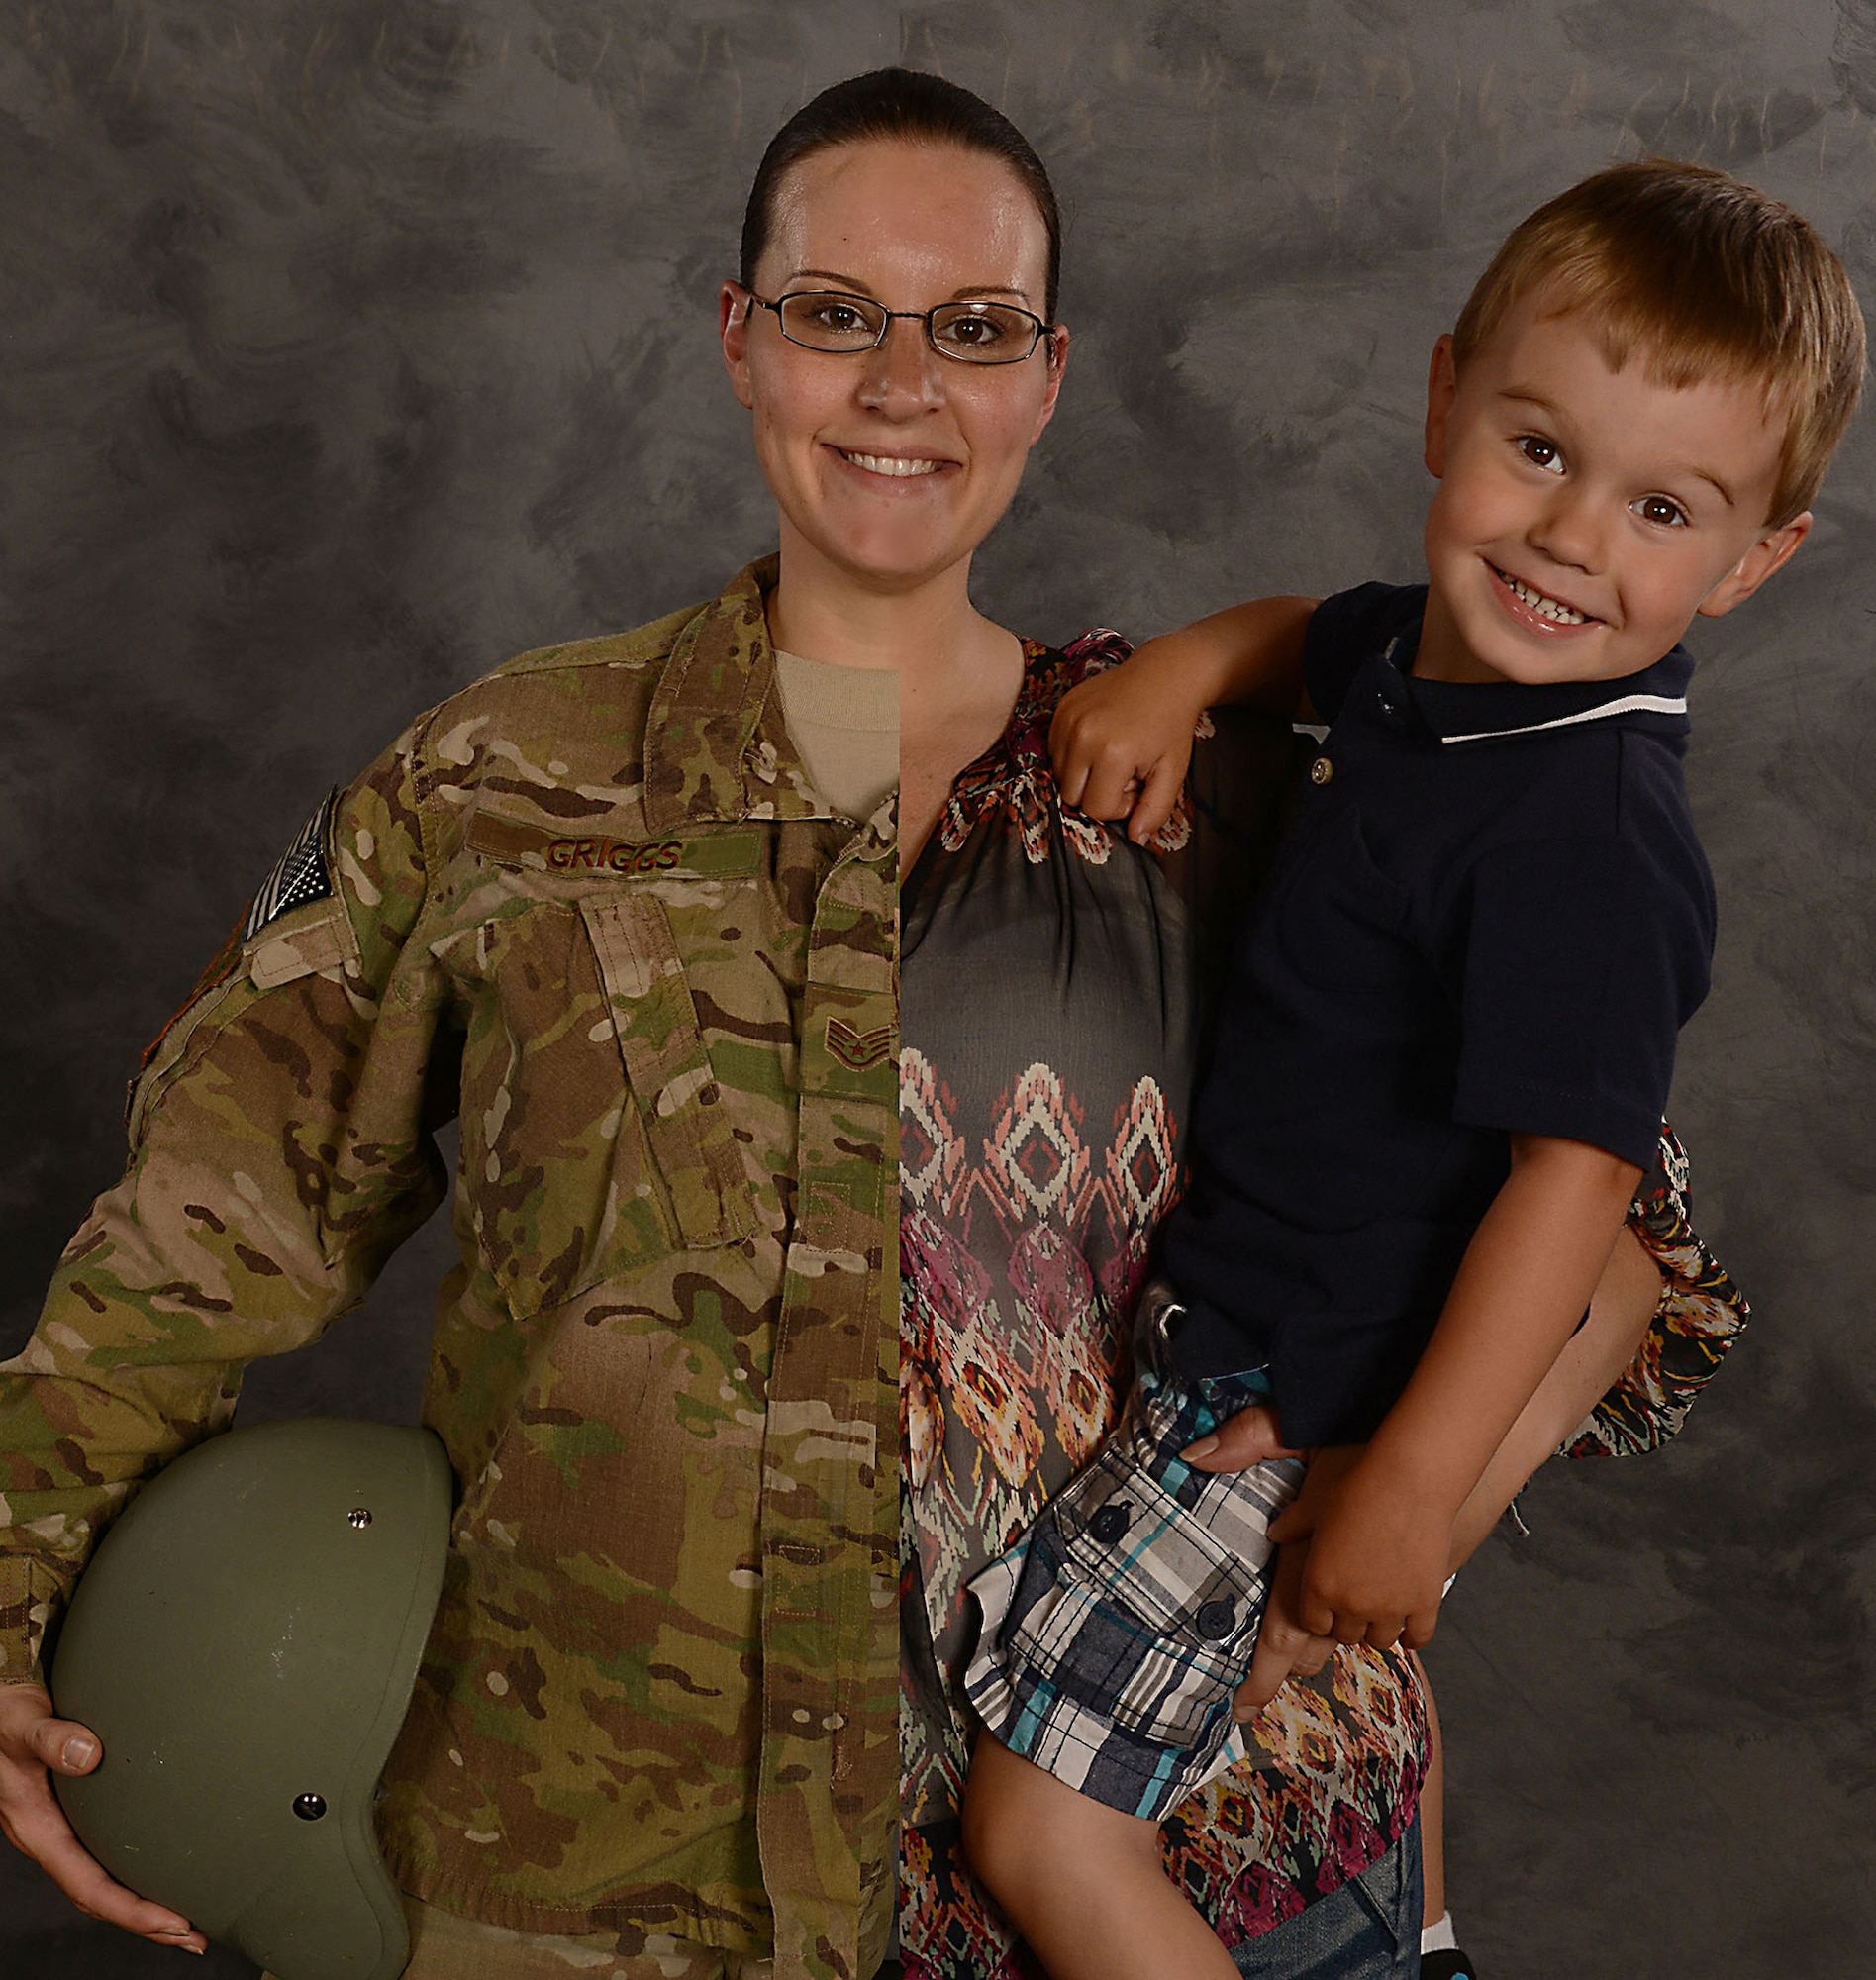 U.S. Air Force Staff Sgt. Amanda Griggs, 23d Component Maintenance Squadron aerospace propulsion craftsman, holds her son, Korbin, for a photo at Moody Air Force Base, Ga., May 8, 2014. Griggs, holding dual roles as an active-duty Airman and a mother, was selected to be highlighted as a military mom in honor of Mother’s Day 2014. (U.S. Air Force photo illustration by Senior Airman Tiffany M. Grigg/Released)